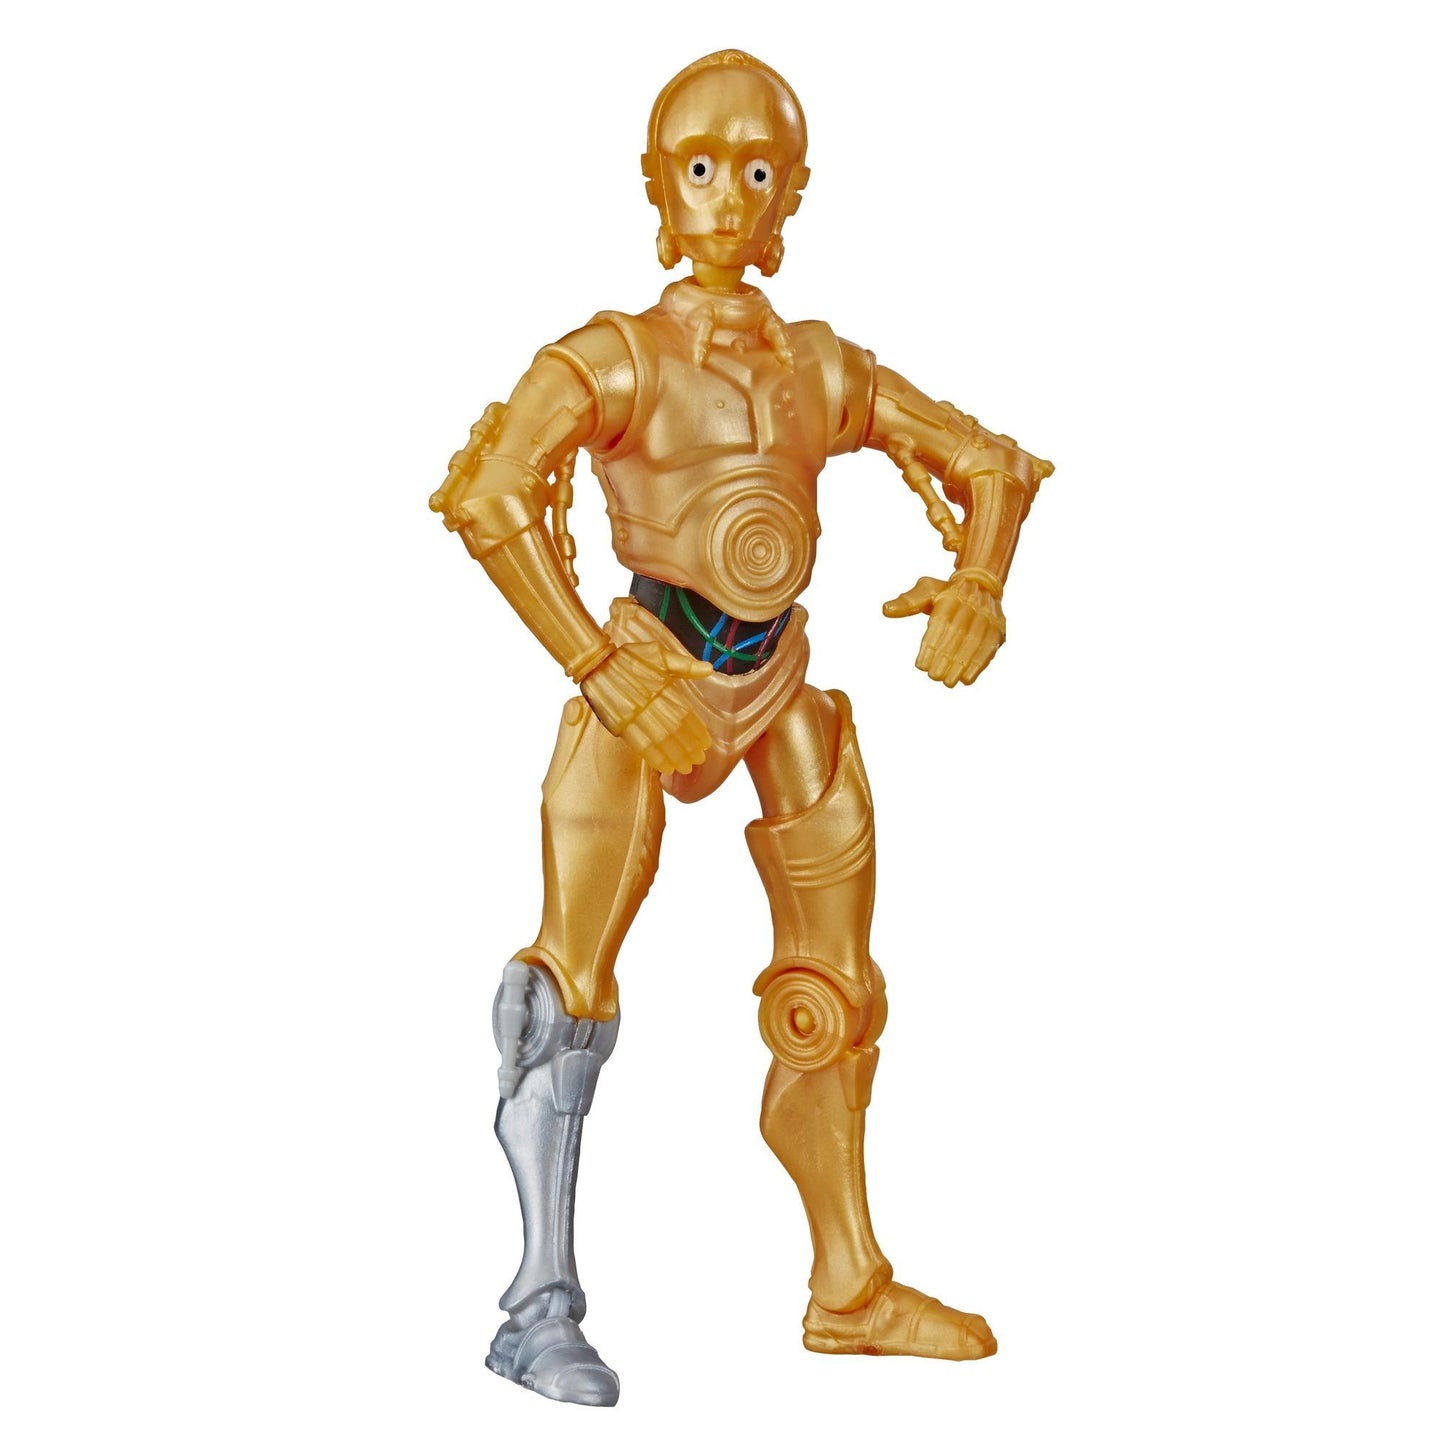 Star Wars Galaxy of Adventures C-3PO Toy Action Figure